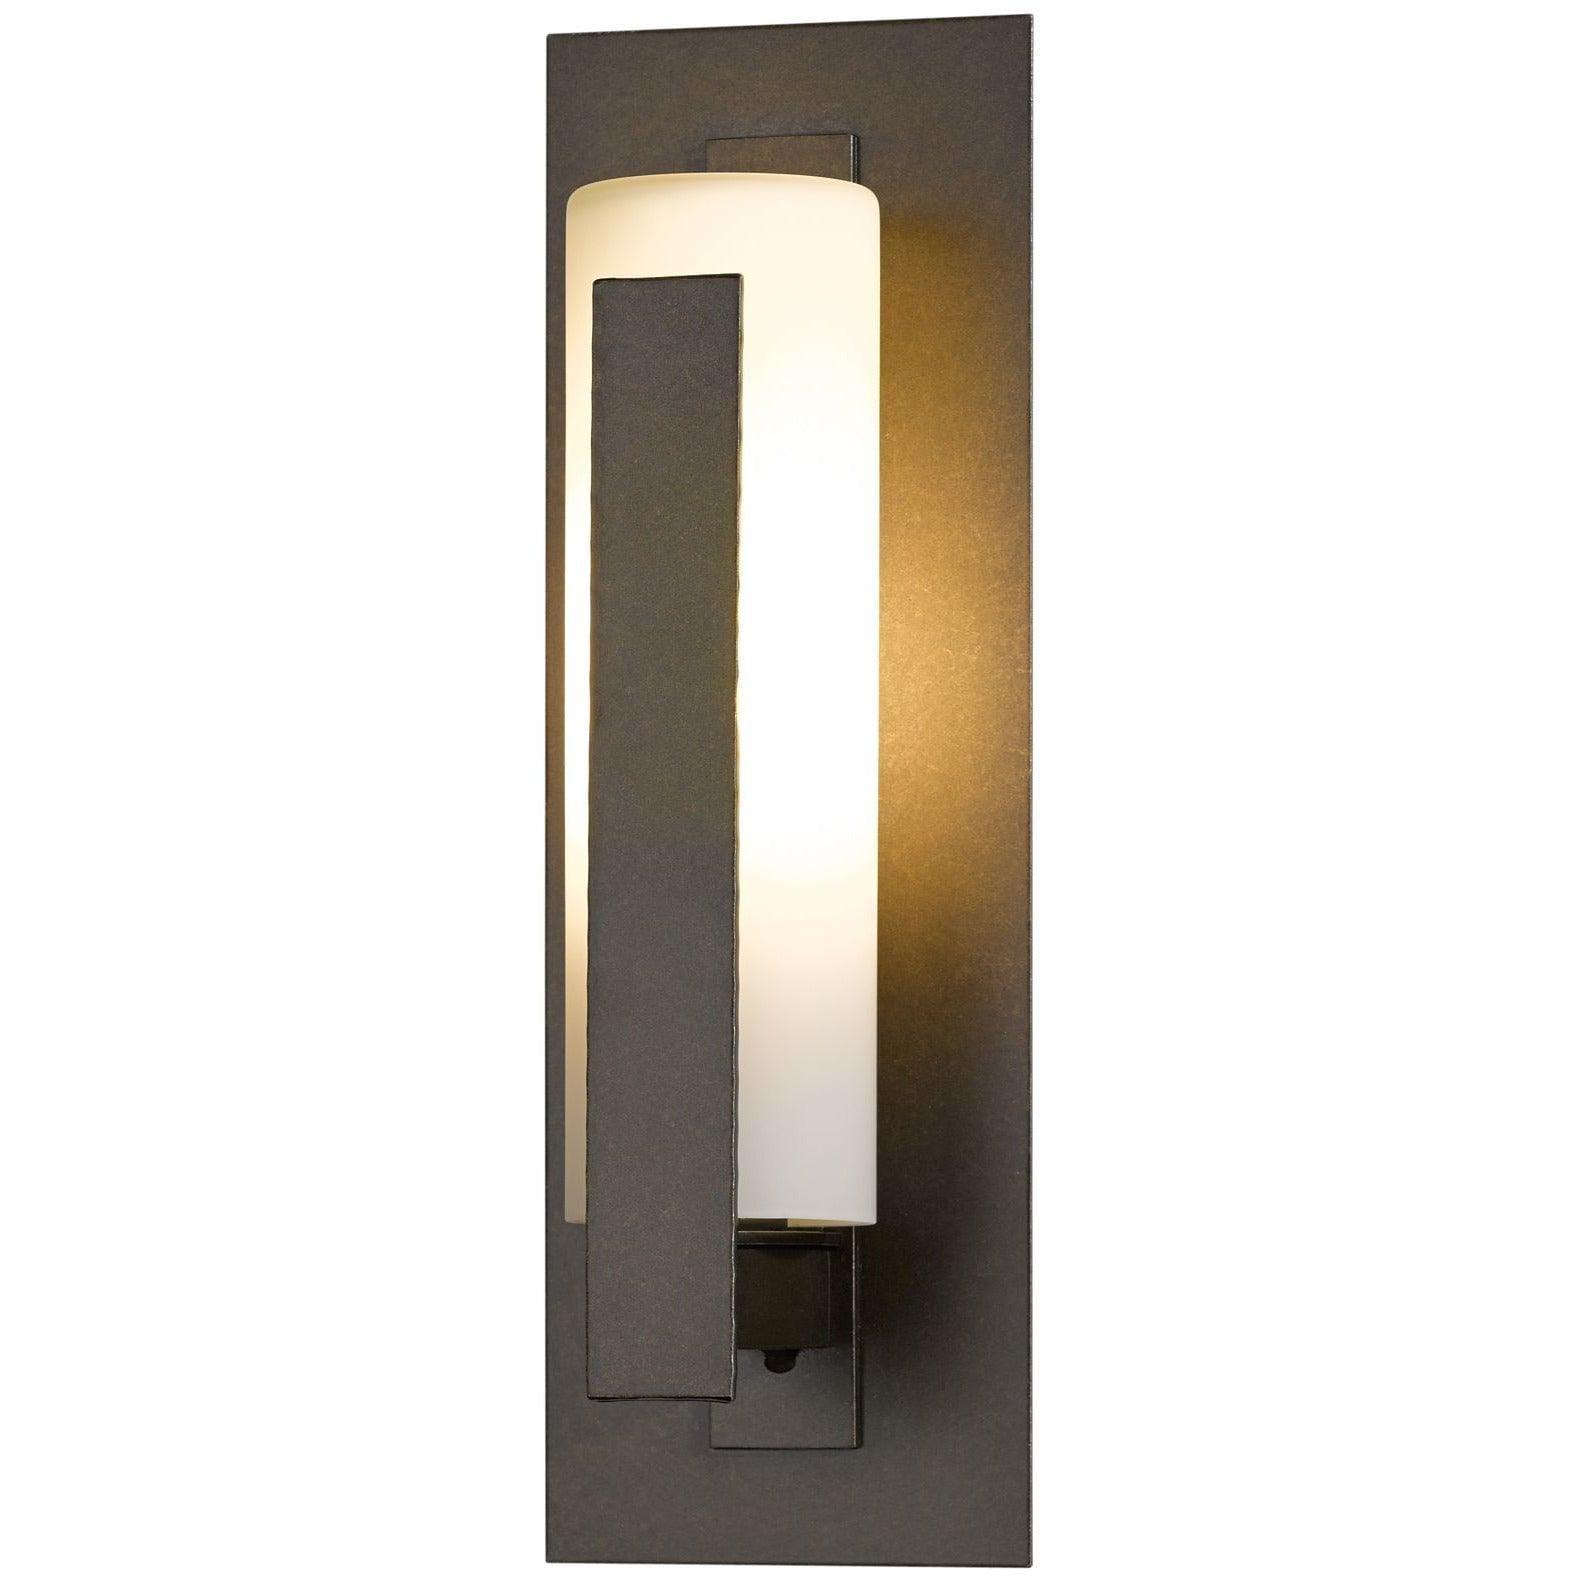 Hubbardton Forge - Forged 15-Inch Outdoor Wall Sconce - 307285-SKT-75-GG0066 | Montreal Lighting & Hardware